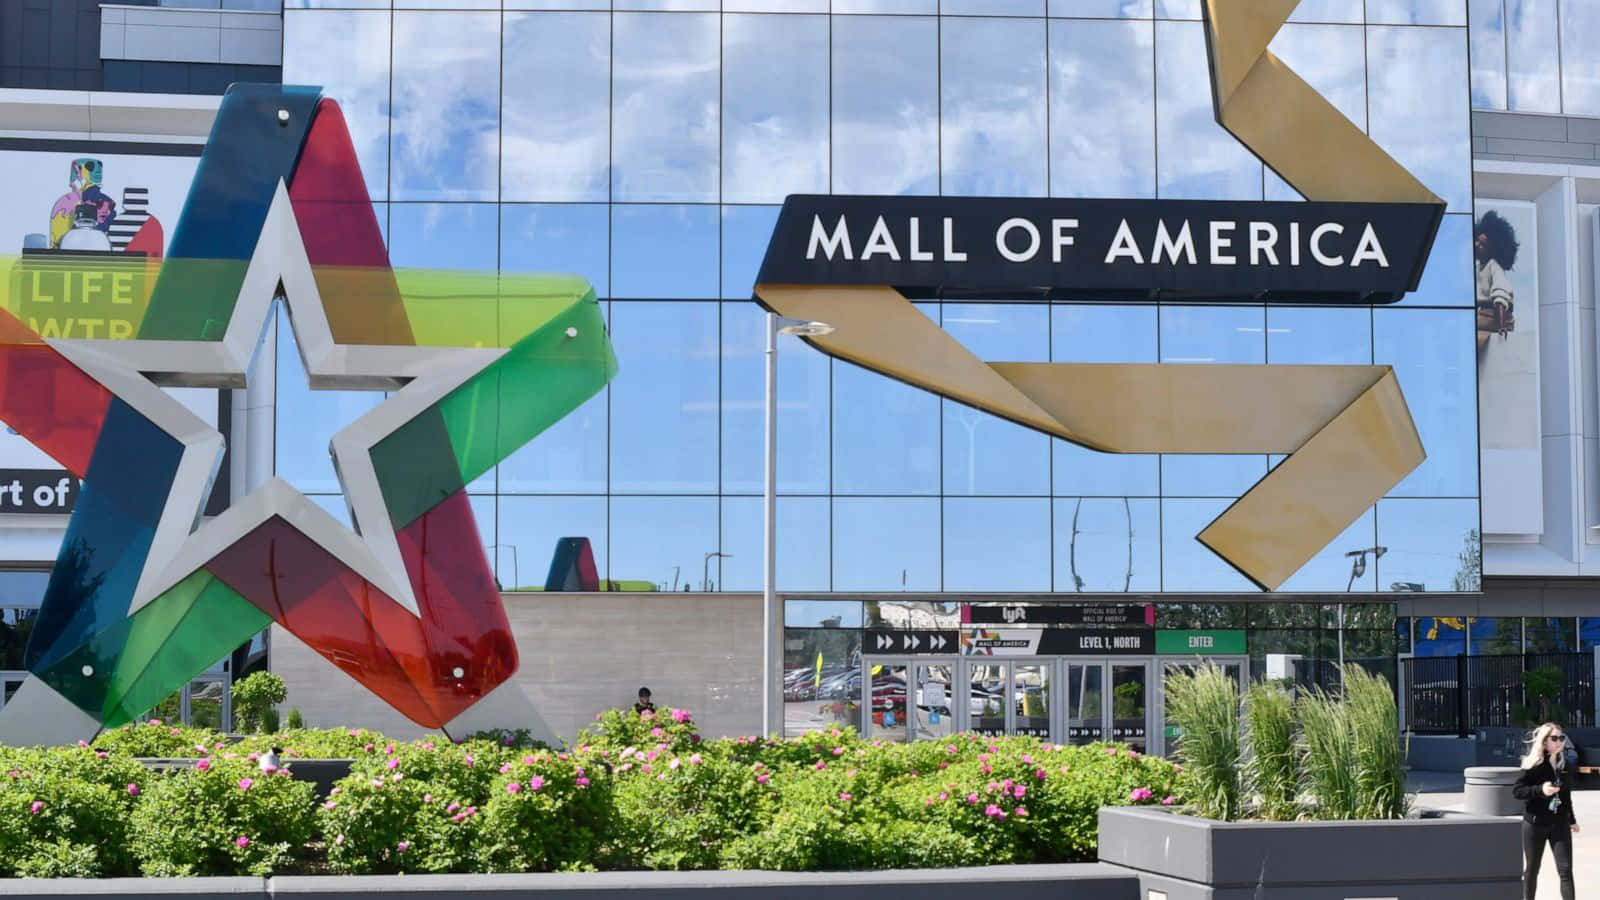 Mall Of America - A Large Building With A Star